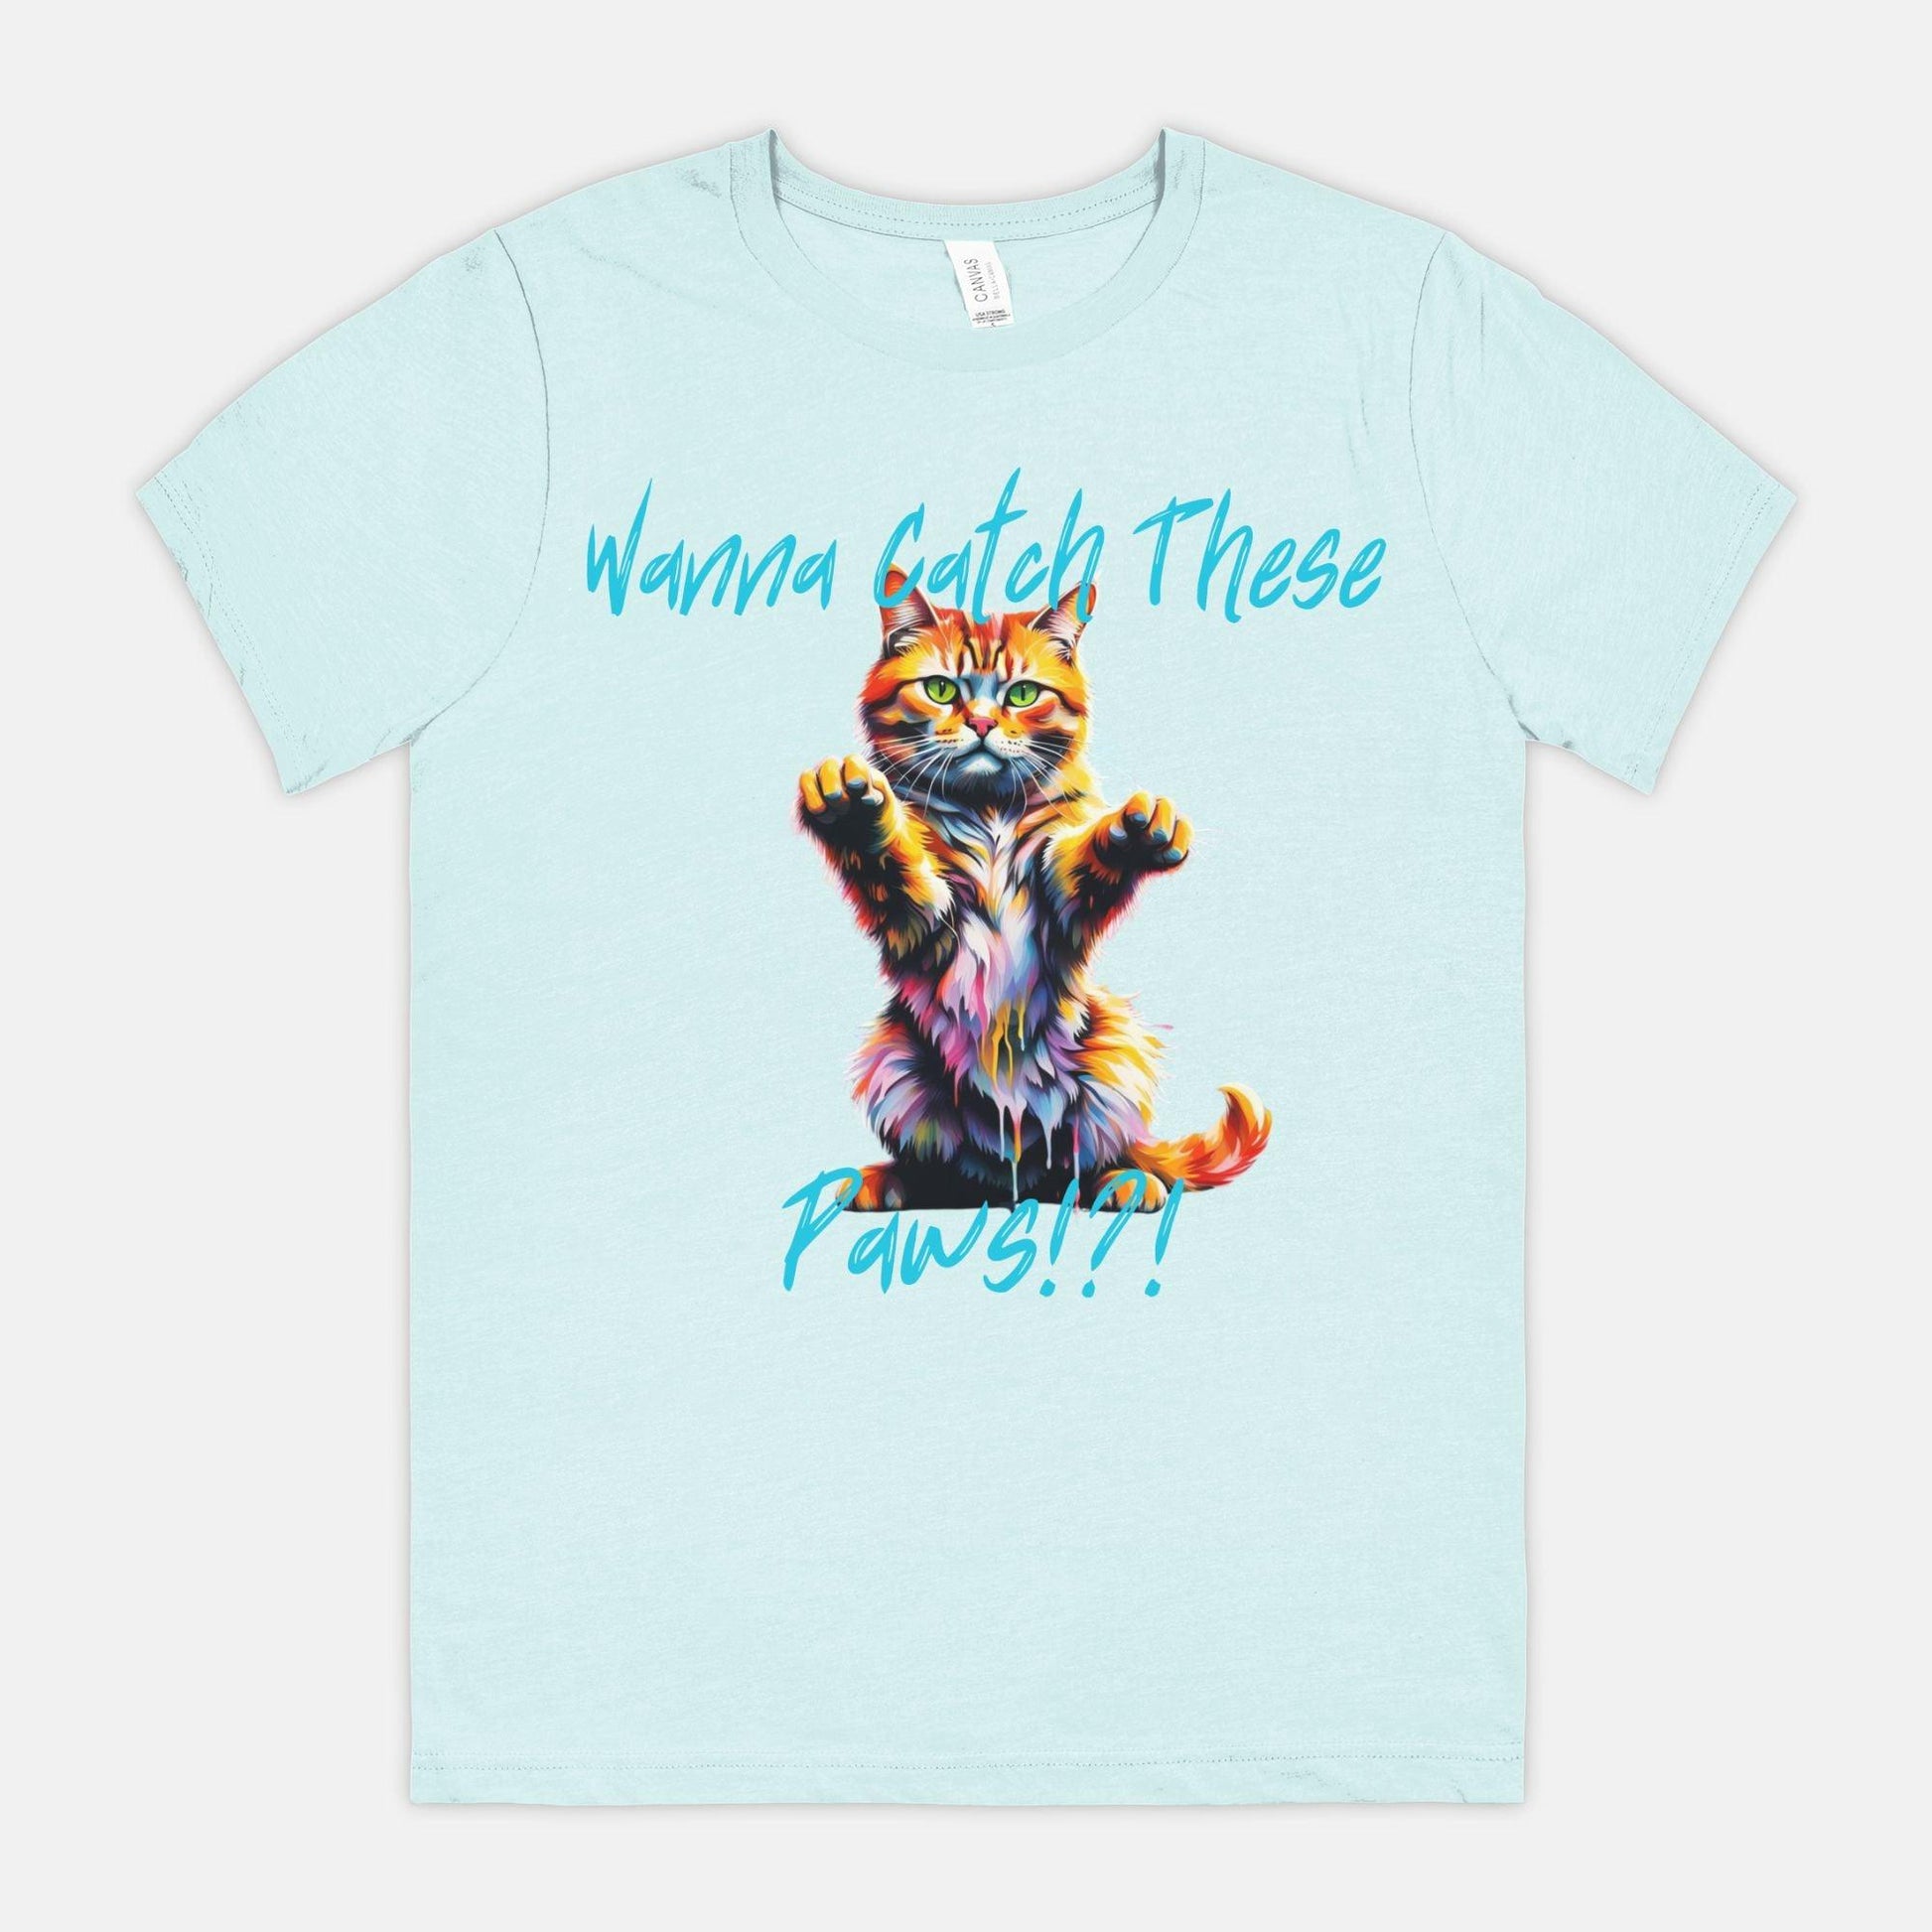 Wanna Catch These Paws!?! Crew Neck Tee - Pet Pride Tees